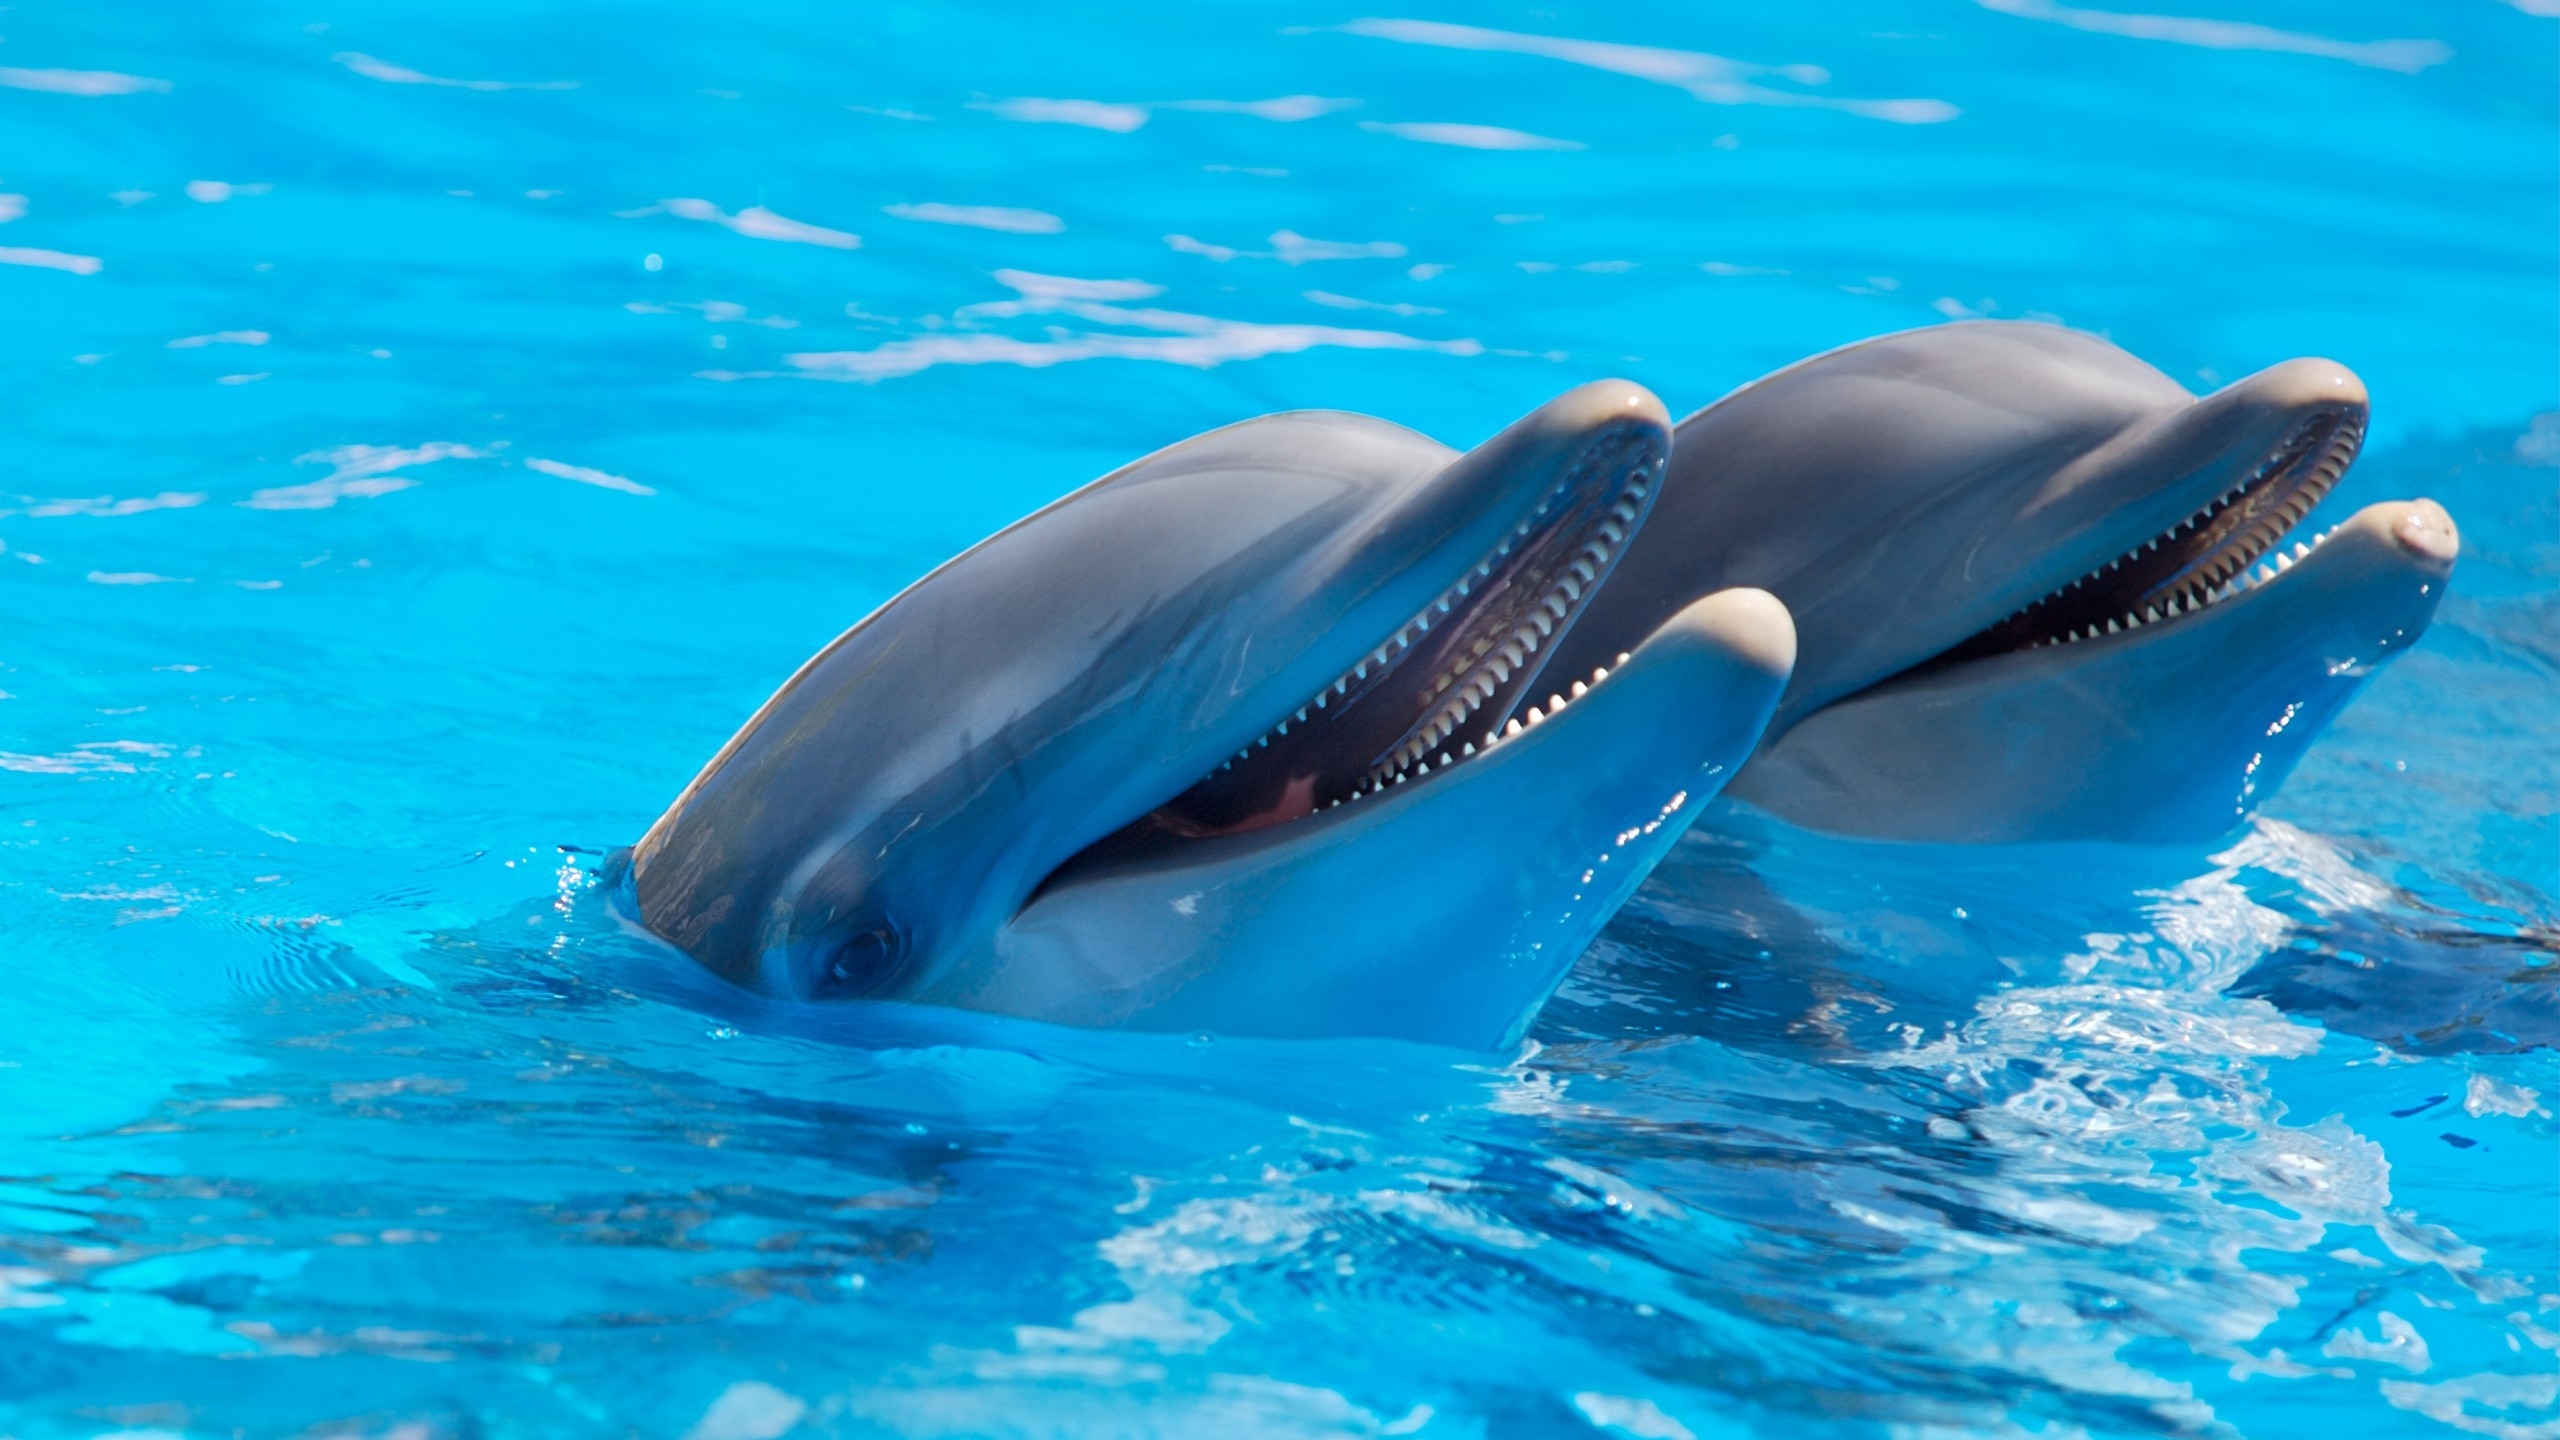 Cute Dolphins for 2560x1440 HDTV resolution